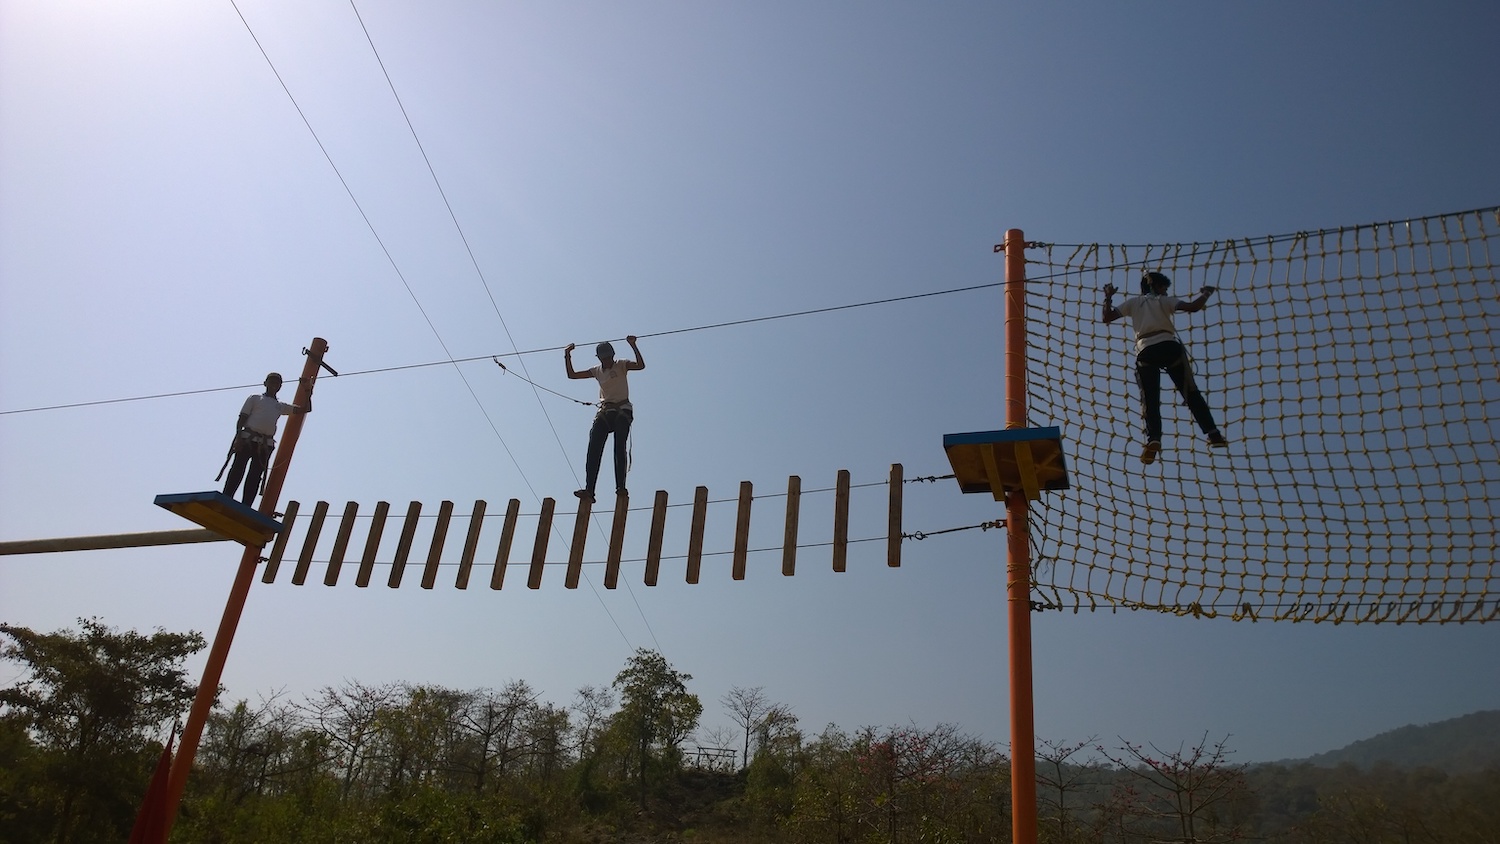 High Rope Course Builder in India